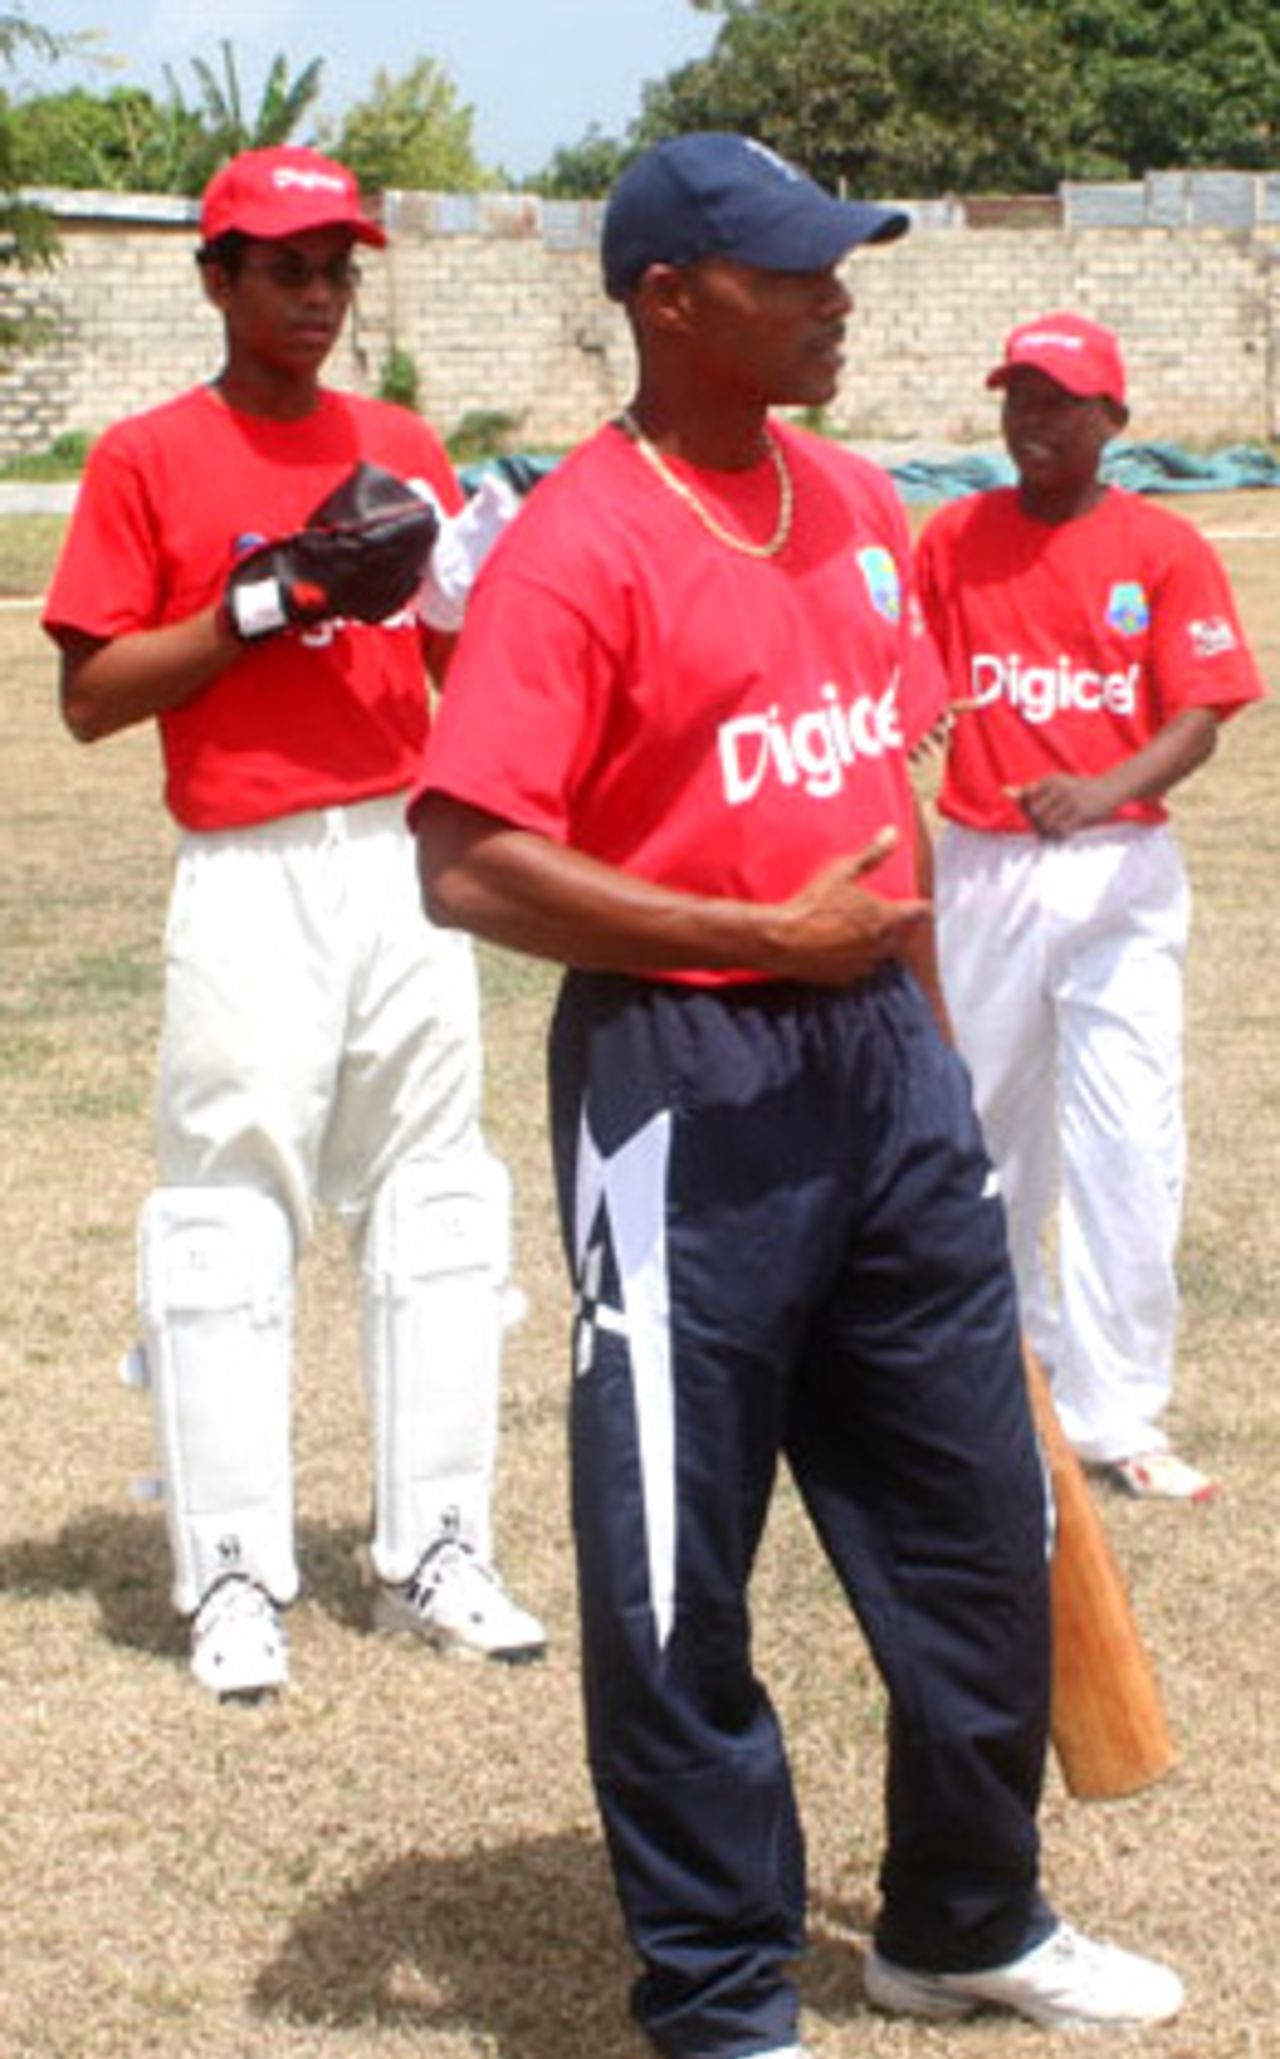 Keith Arthurton conducts a fielding session on the first day of a coaching clinic, Jamaica, July 30, 2007